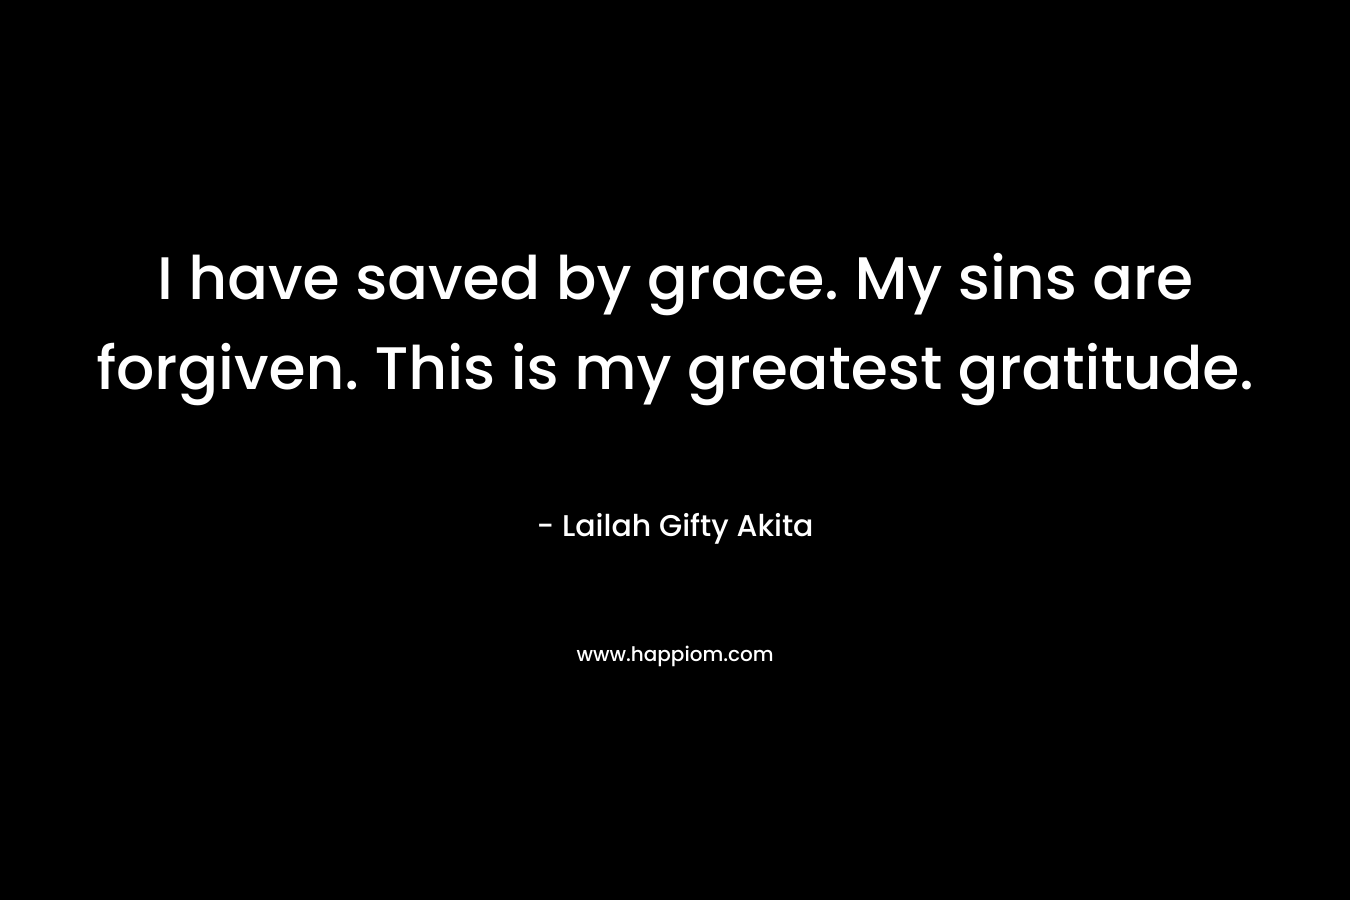 I have saved by grace. My sins are forgiven. This is my greatest gratitude.